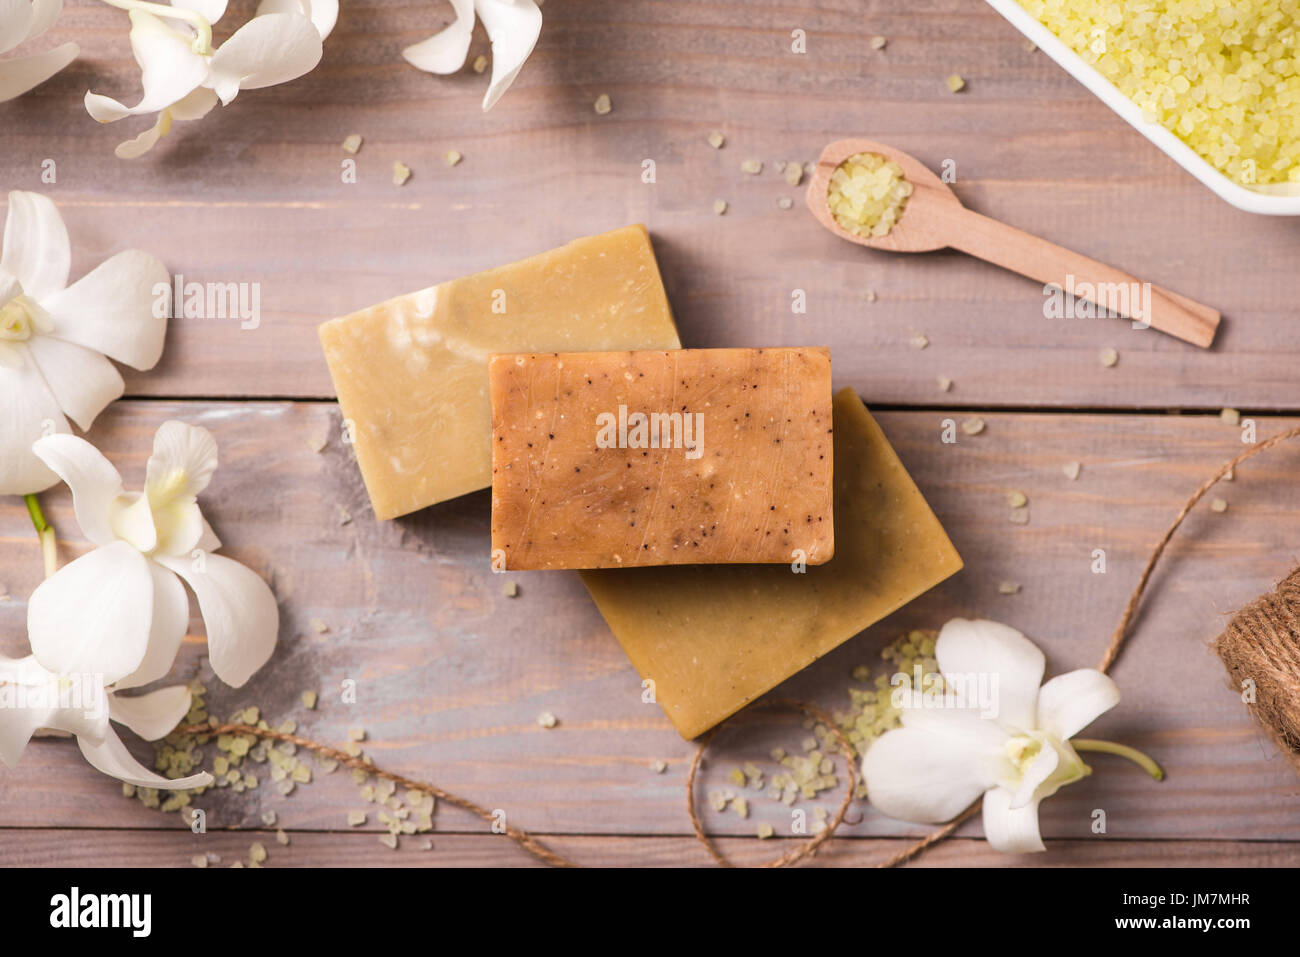 Handmade soap with white orchid. Spa products. Stock Photo